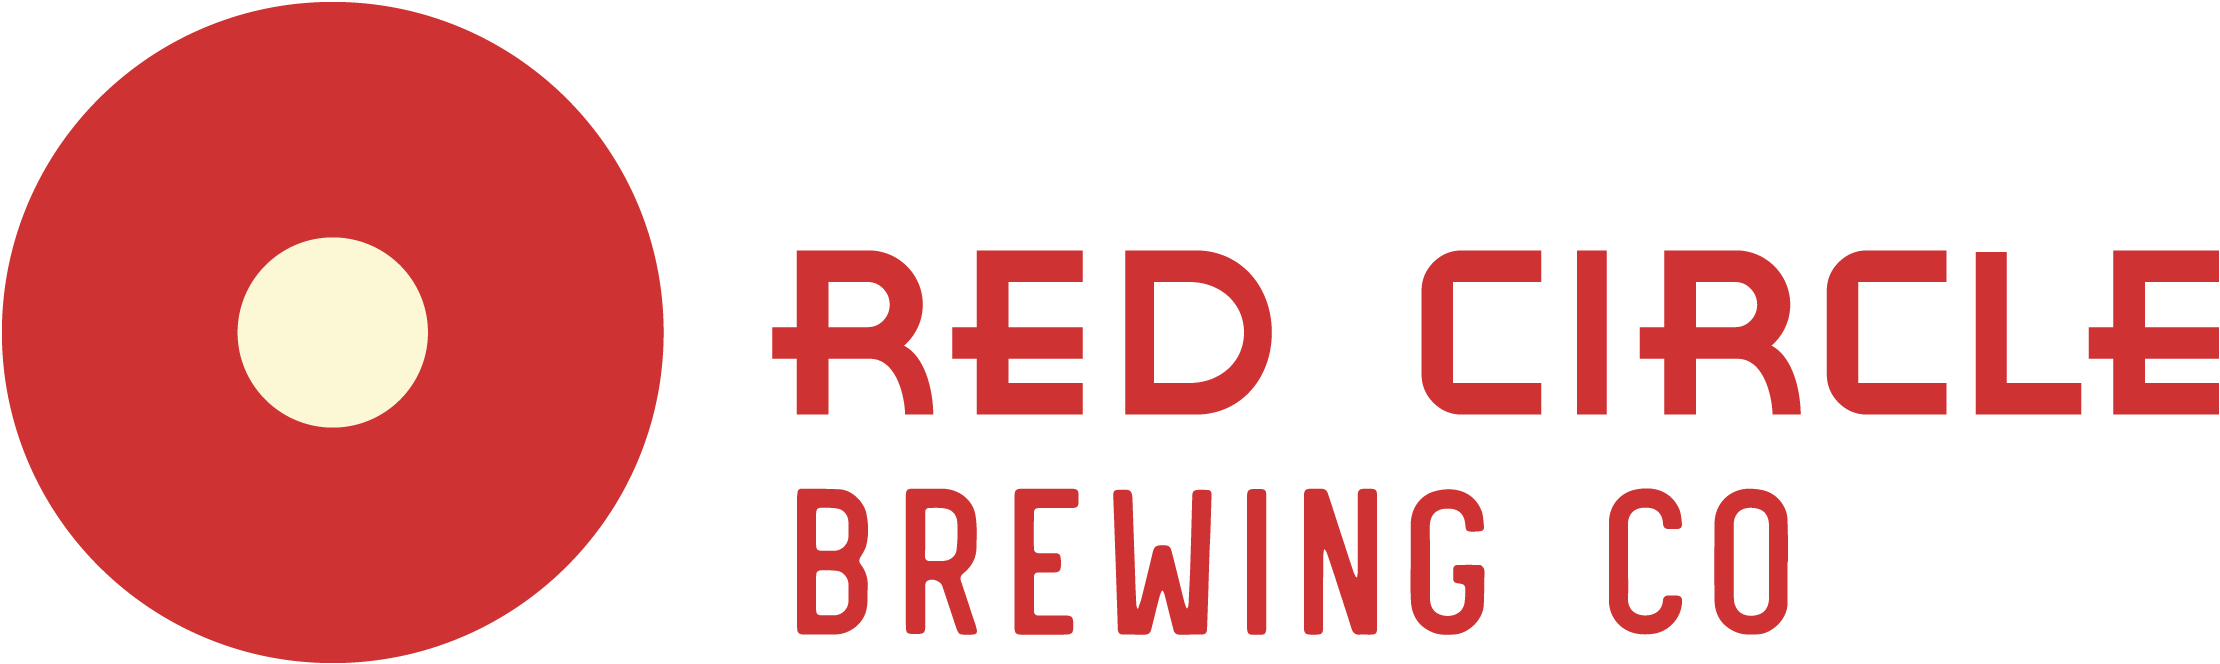 Red Oval Circle Logo - Red Circle Brewing Co. | About